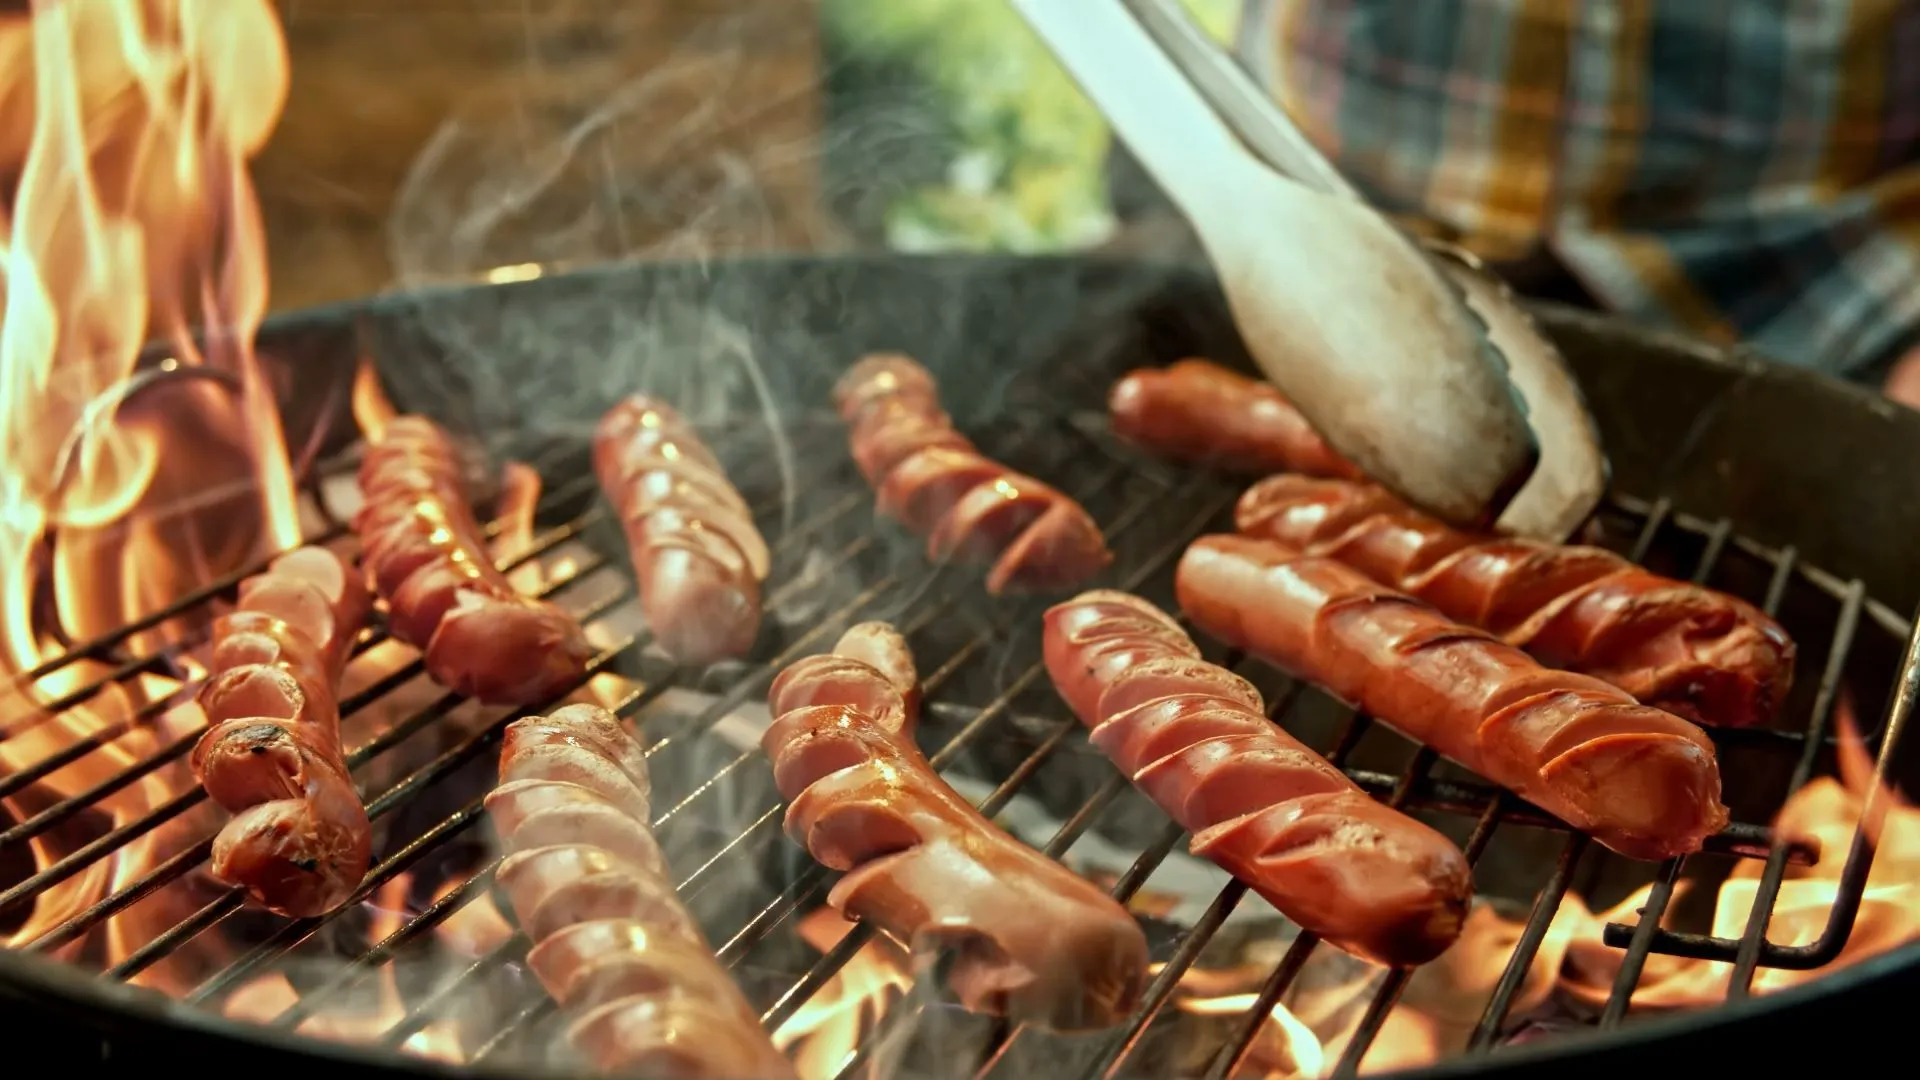 Eat sausage every day: This is what sausage consumption does to your body